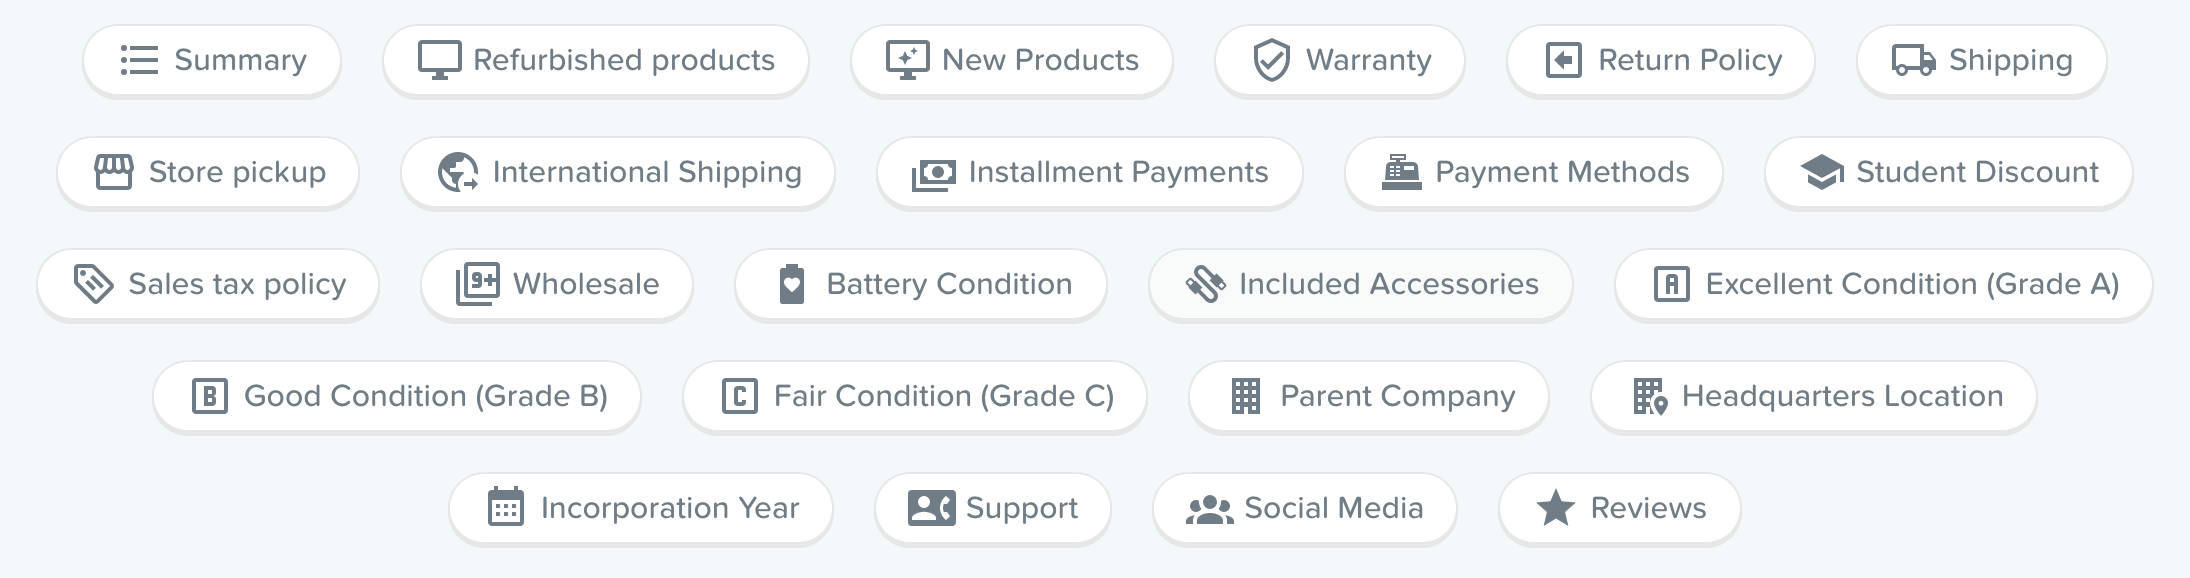 RefurbMe merchant and product data